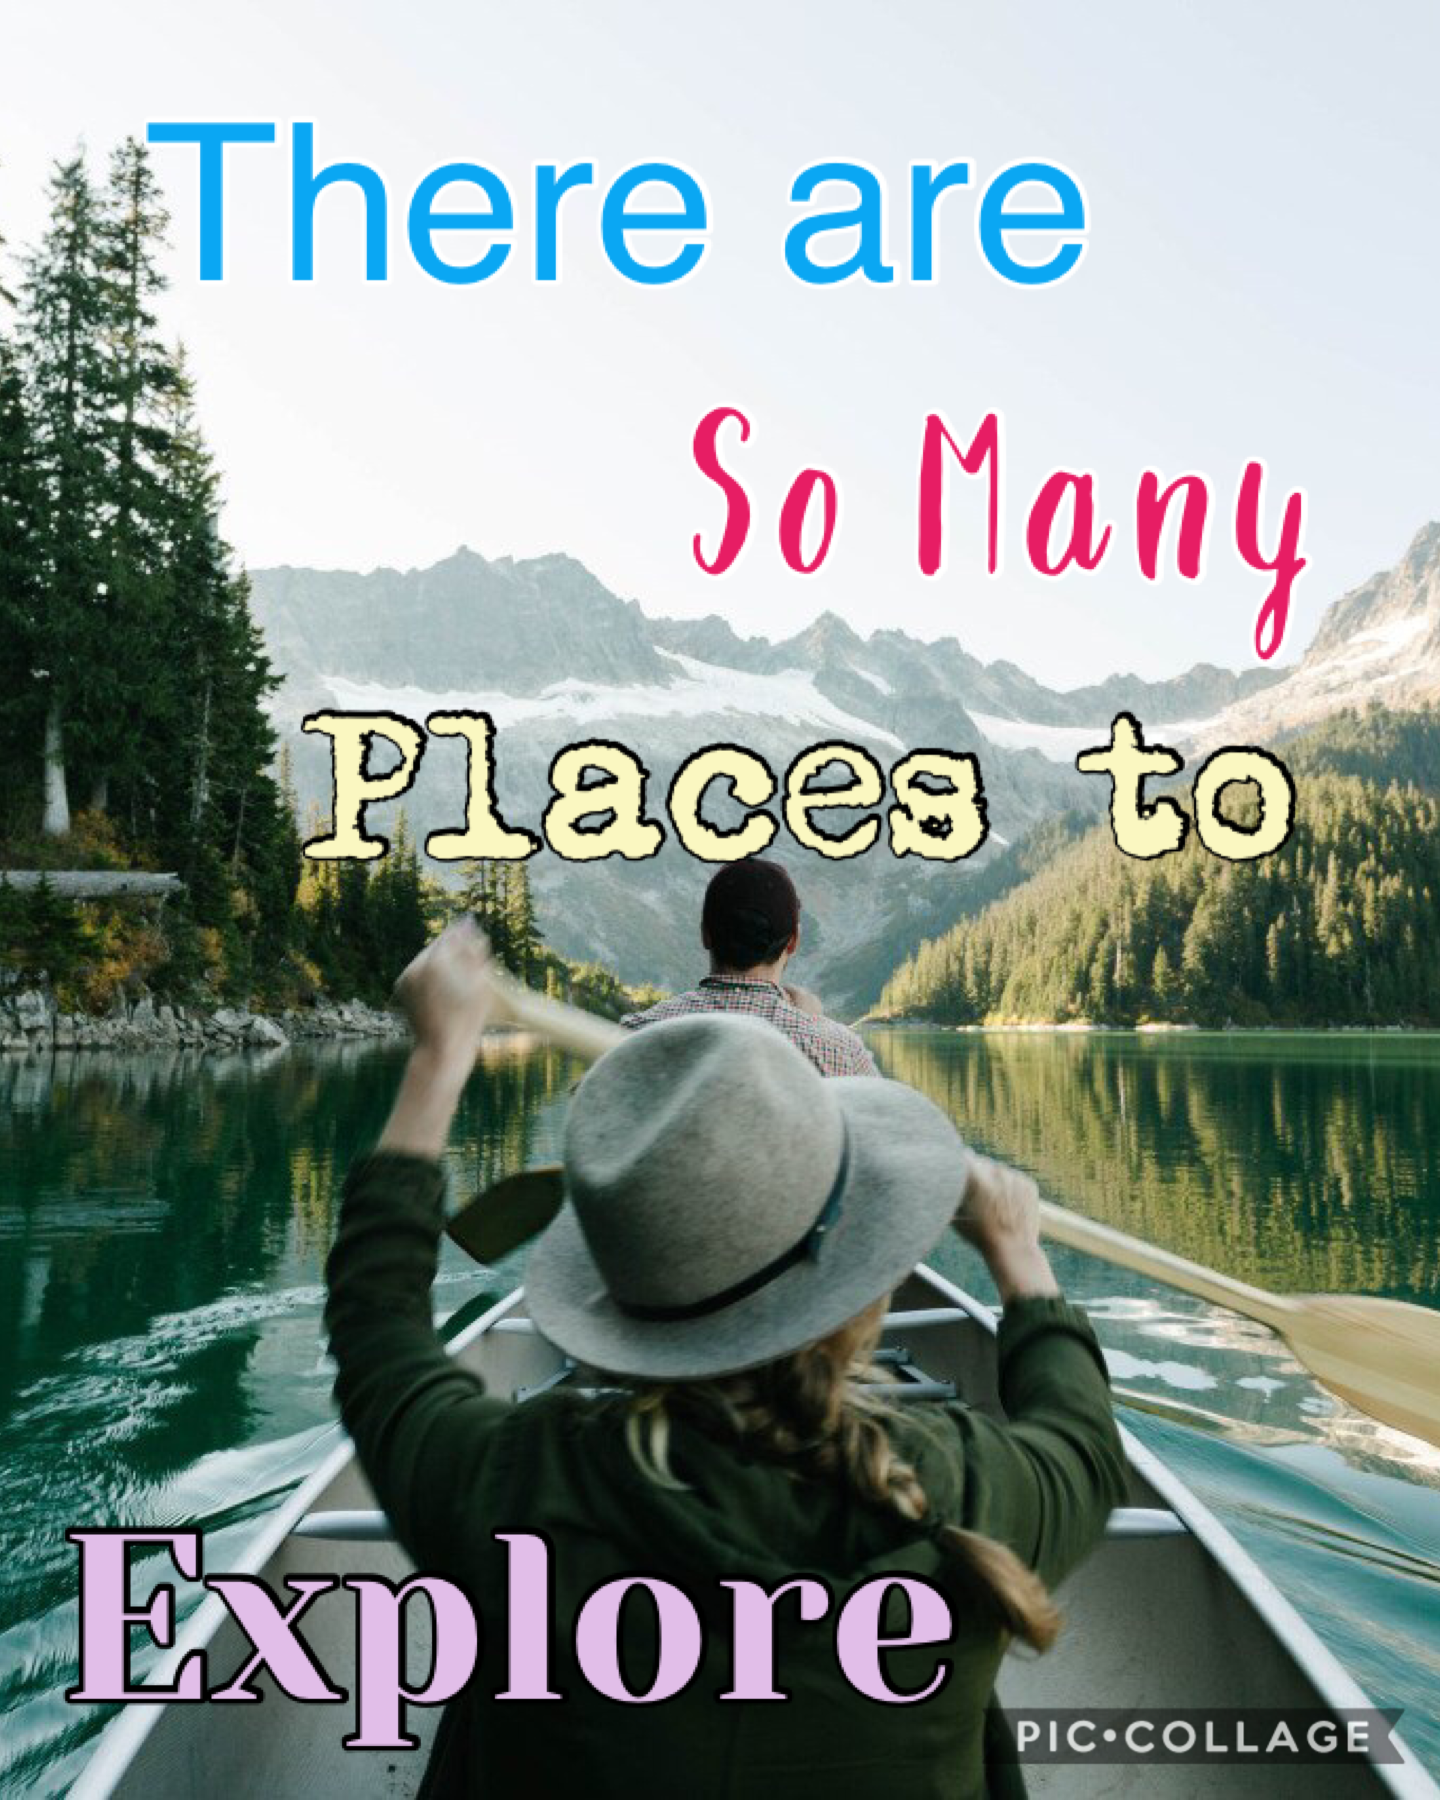 Travel quote collage 